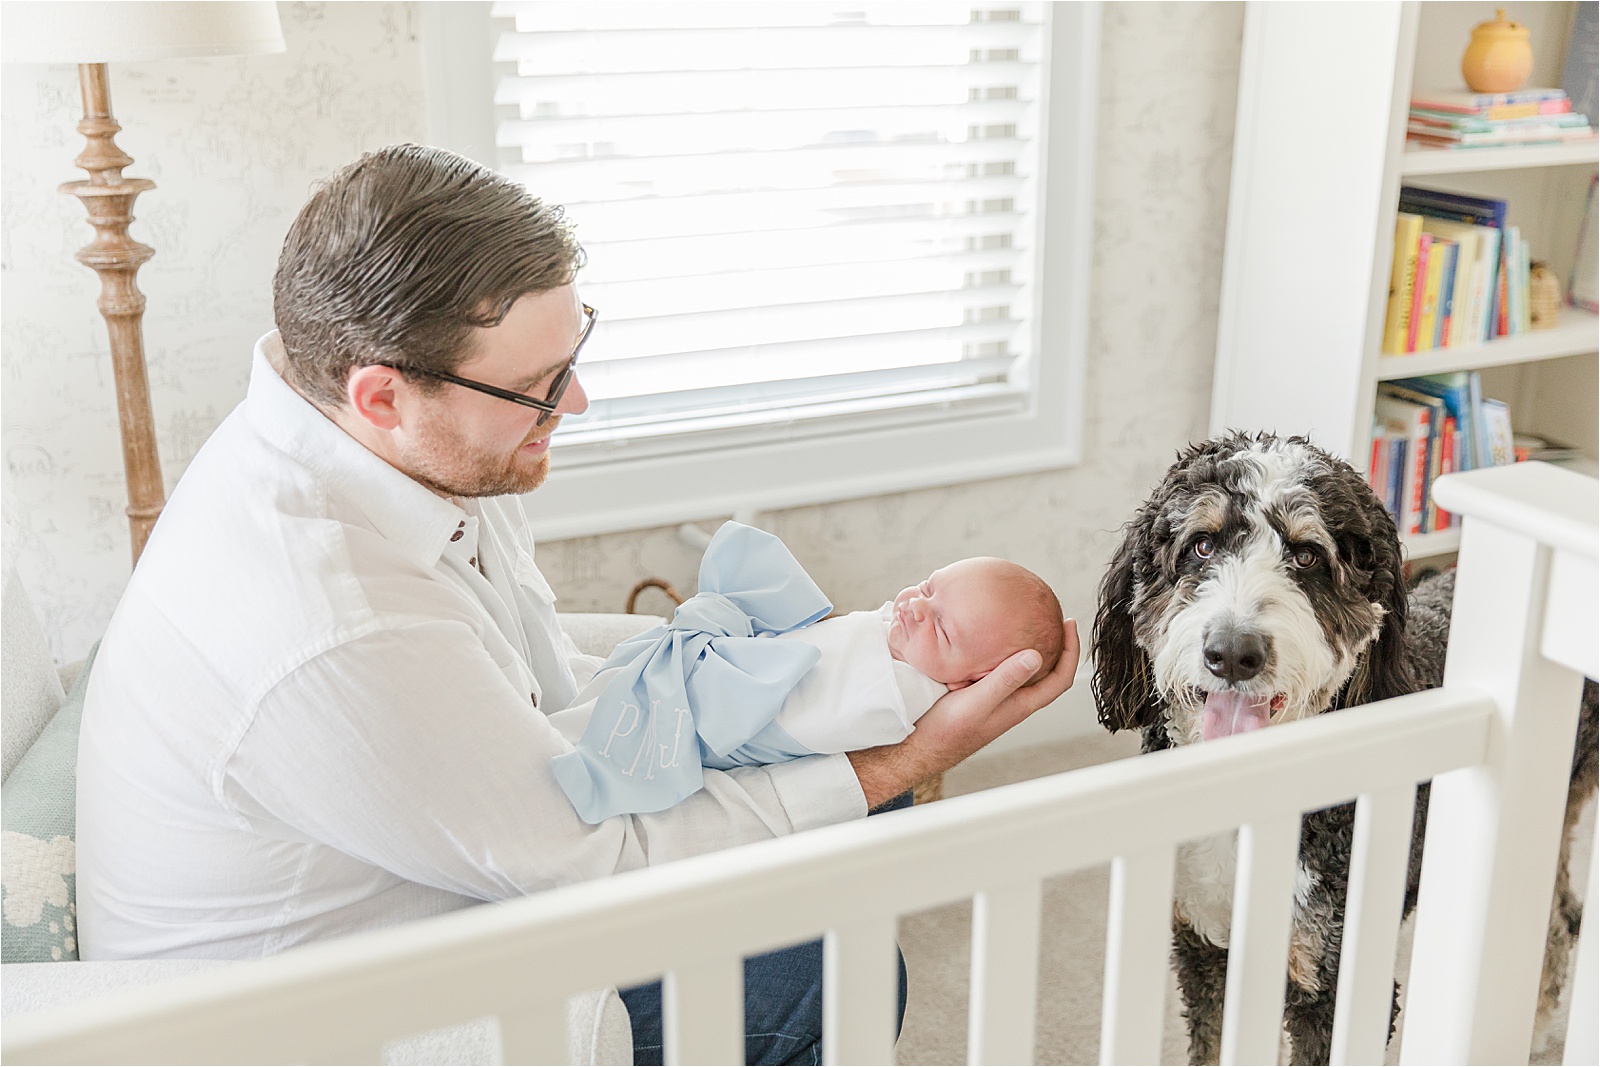 Dad holding baby in Beaufort Bonnet Bow Swaddle as Dog looks at camera